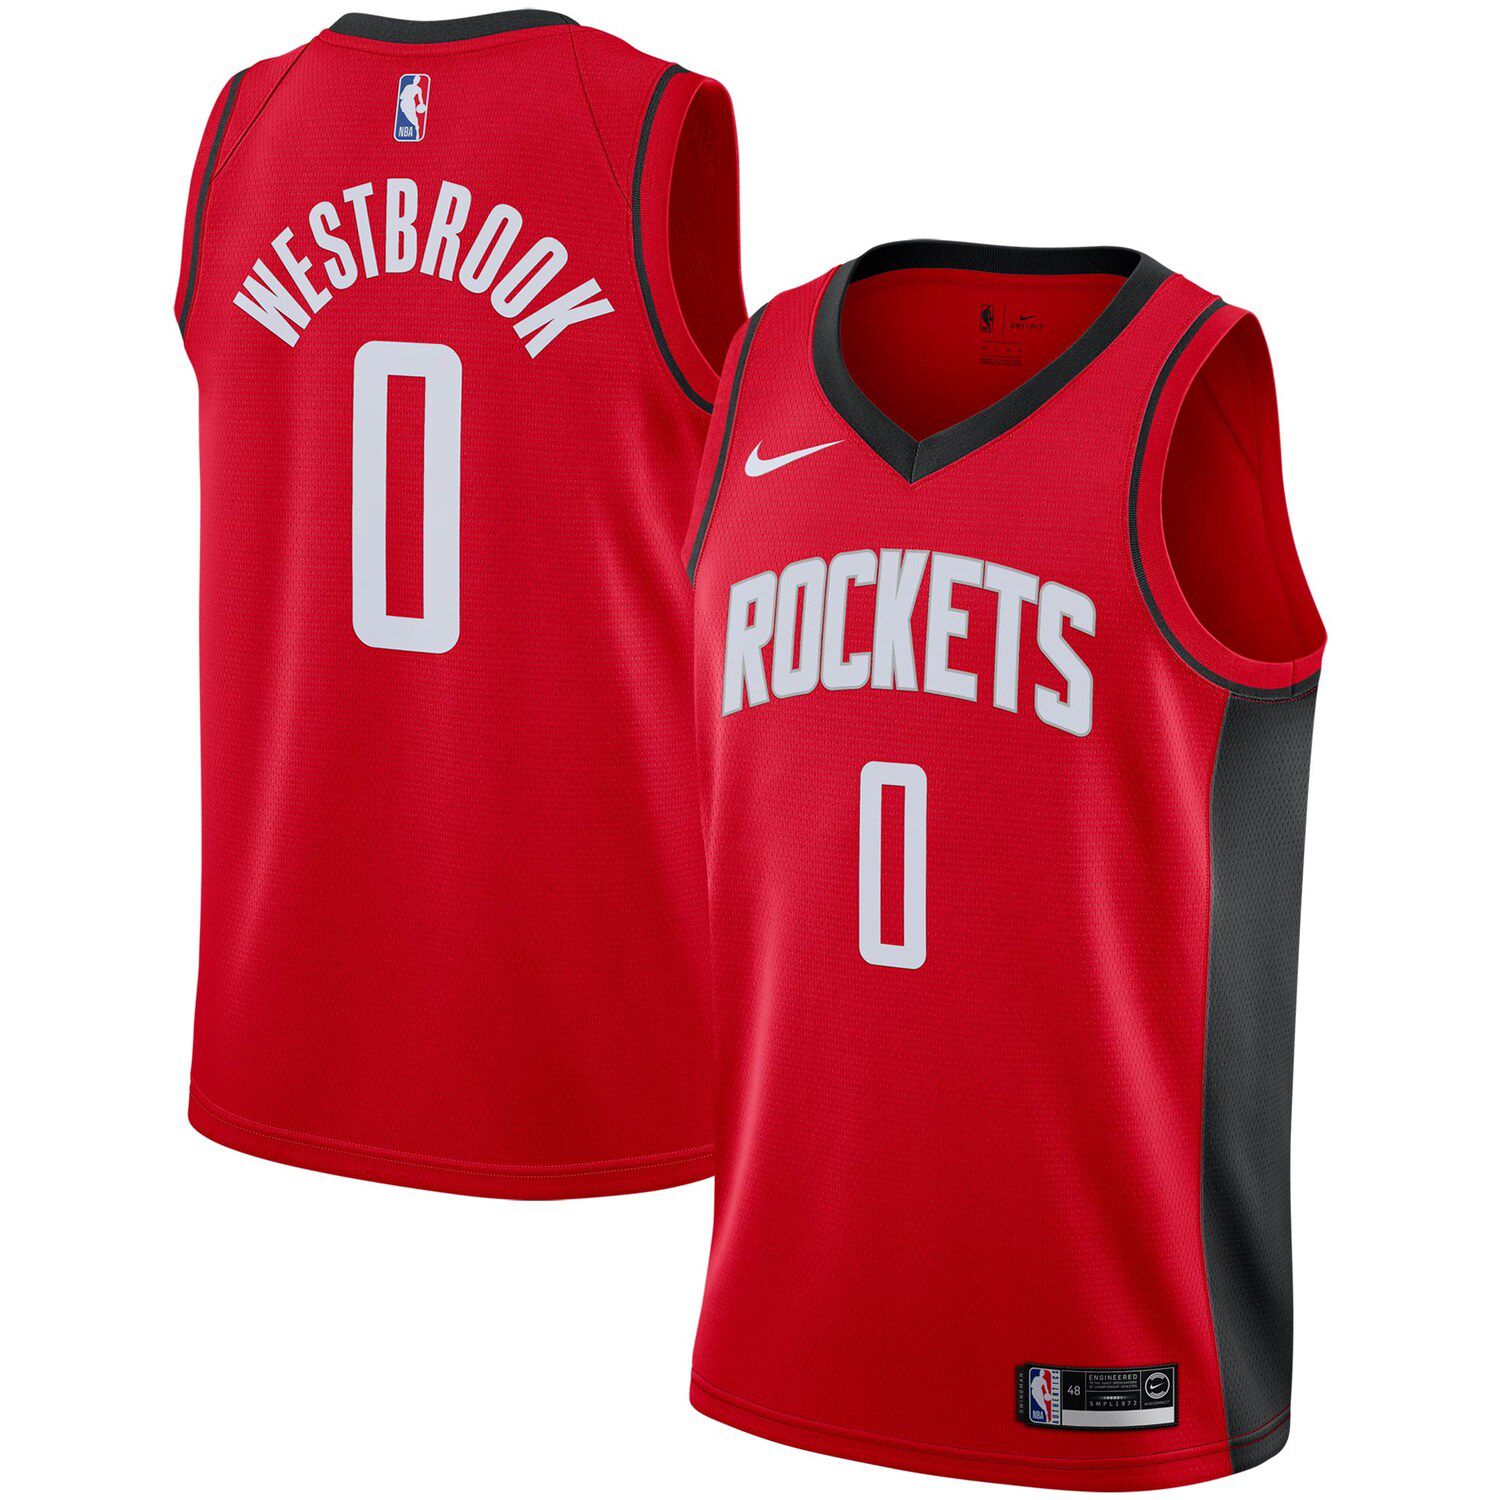 Russell Westbrook Red Houston Rockets 